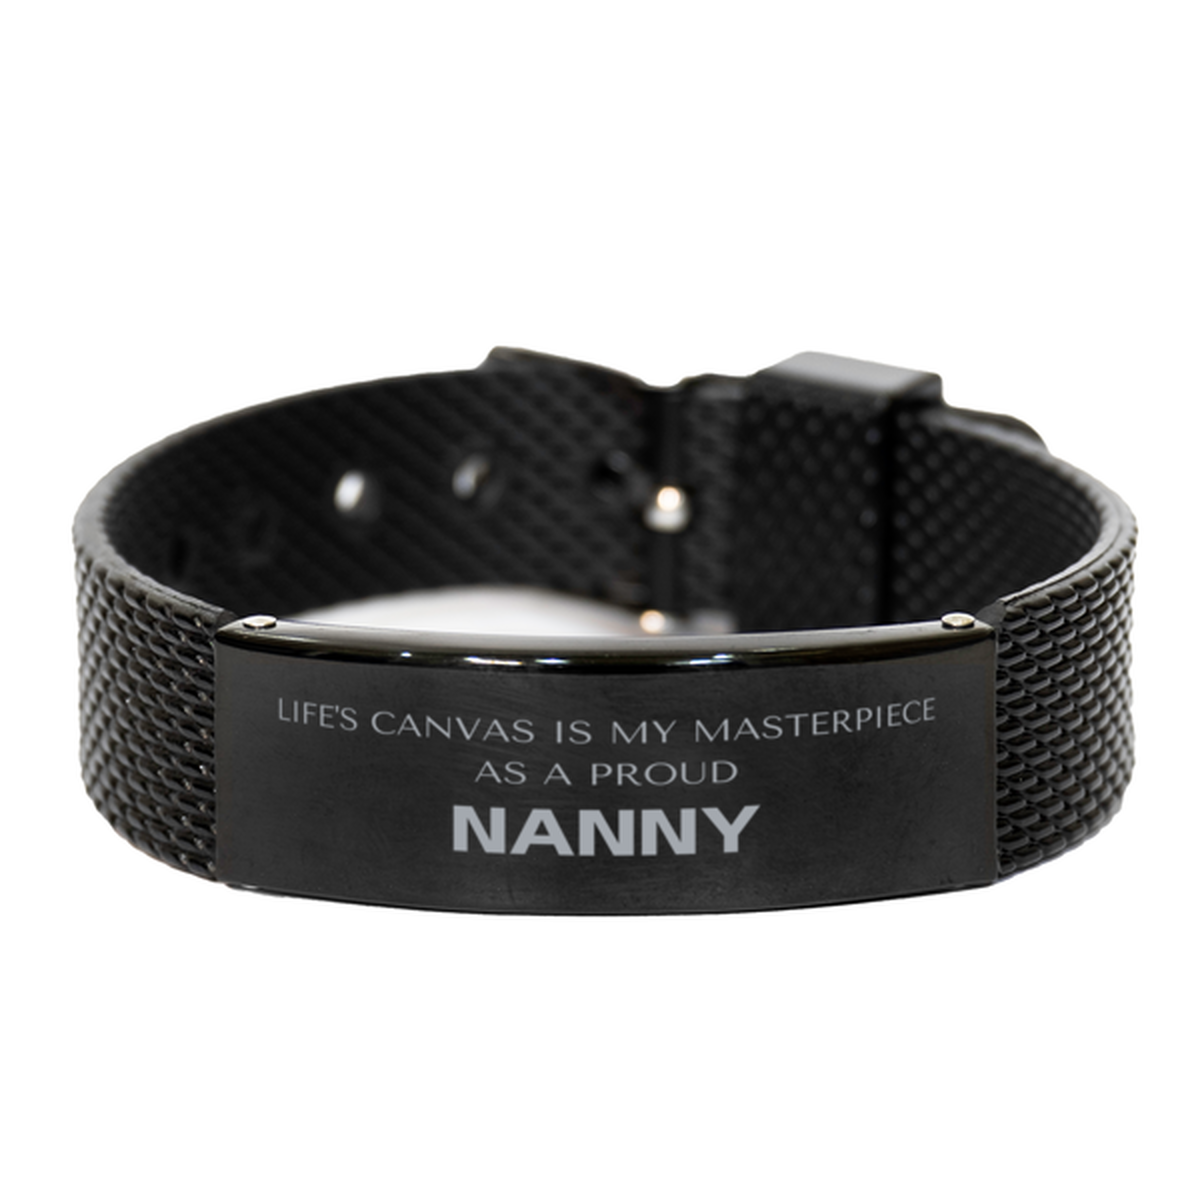 Proud Nanny Gifts, Life's canvas is my masterpiece, Epic Birthday Christmas Unique Black Shark Mesh Bracelet For Nanny, Coworkers, Men, Women, Friends